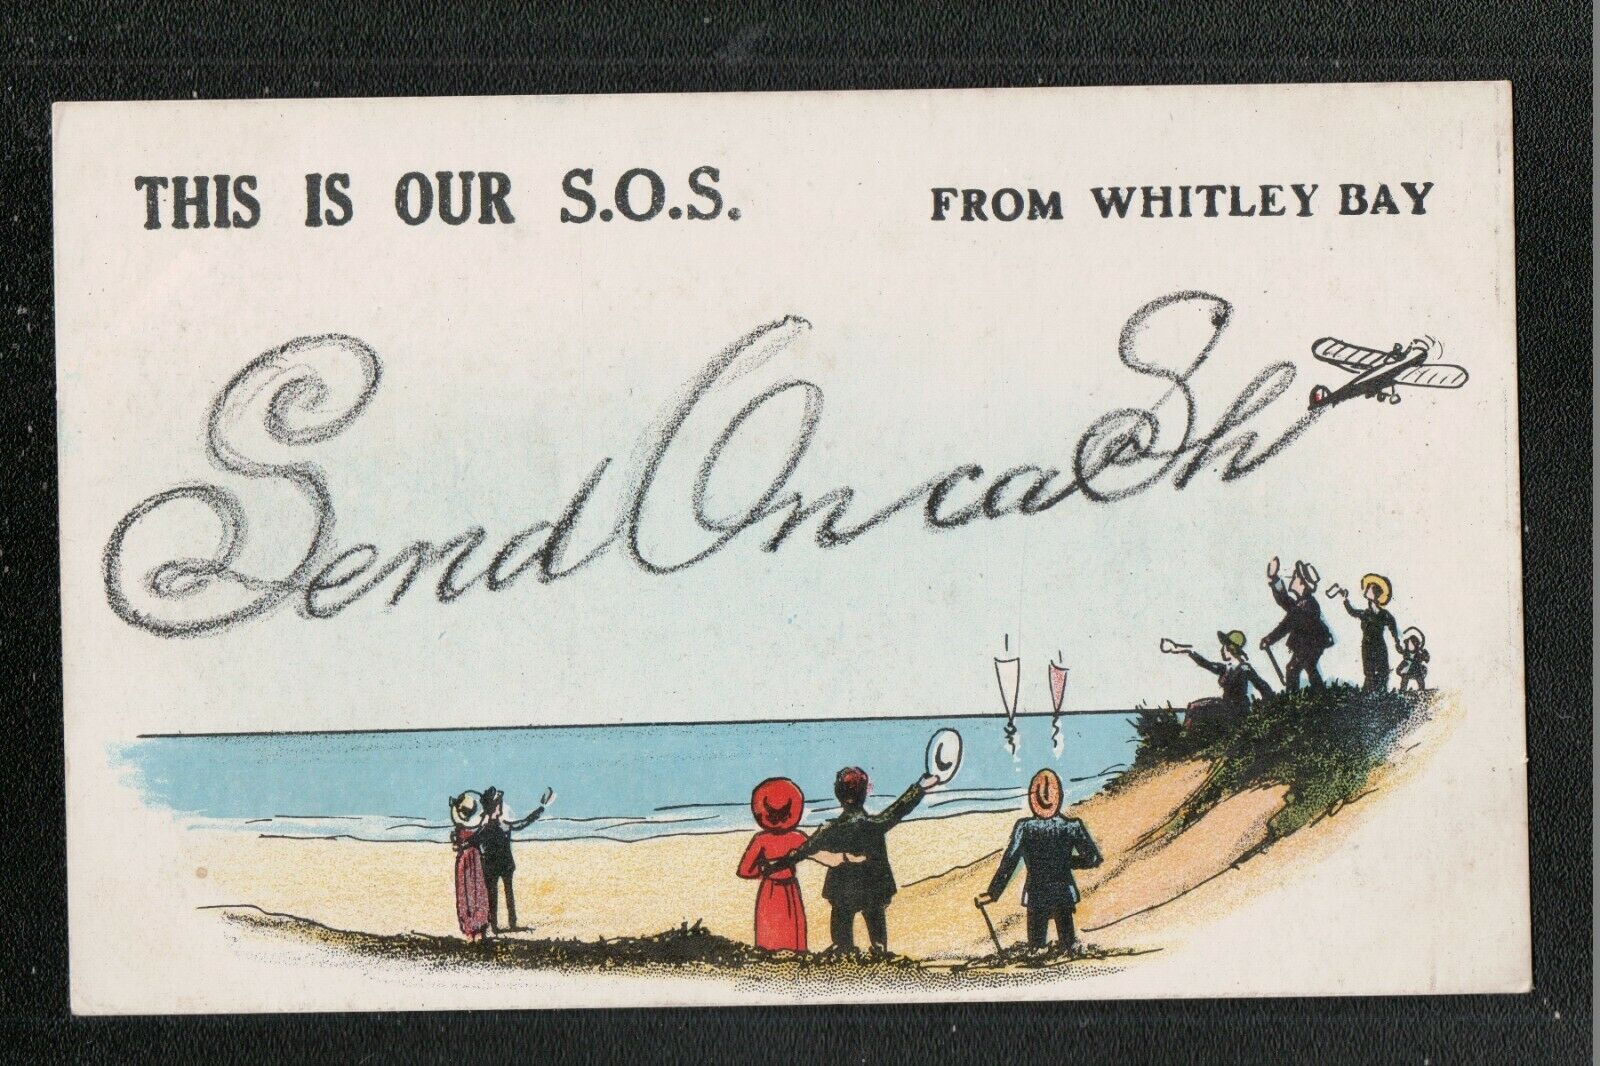 House Clearance - This Is Ous S.O.S. At WHITLEY BAY Send On Cash 1930's? Service ~ Northumberland